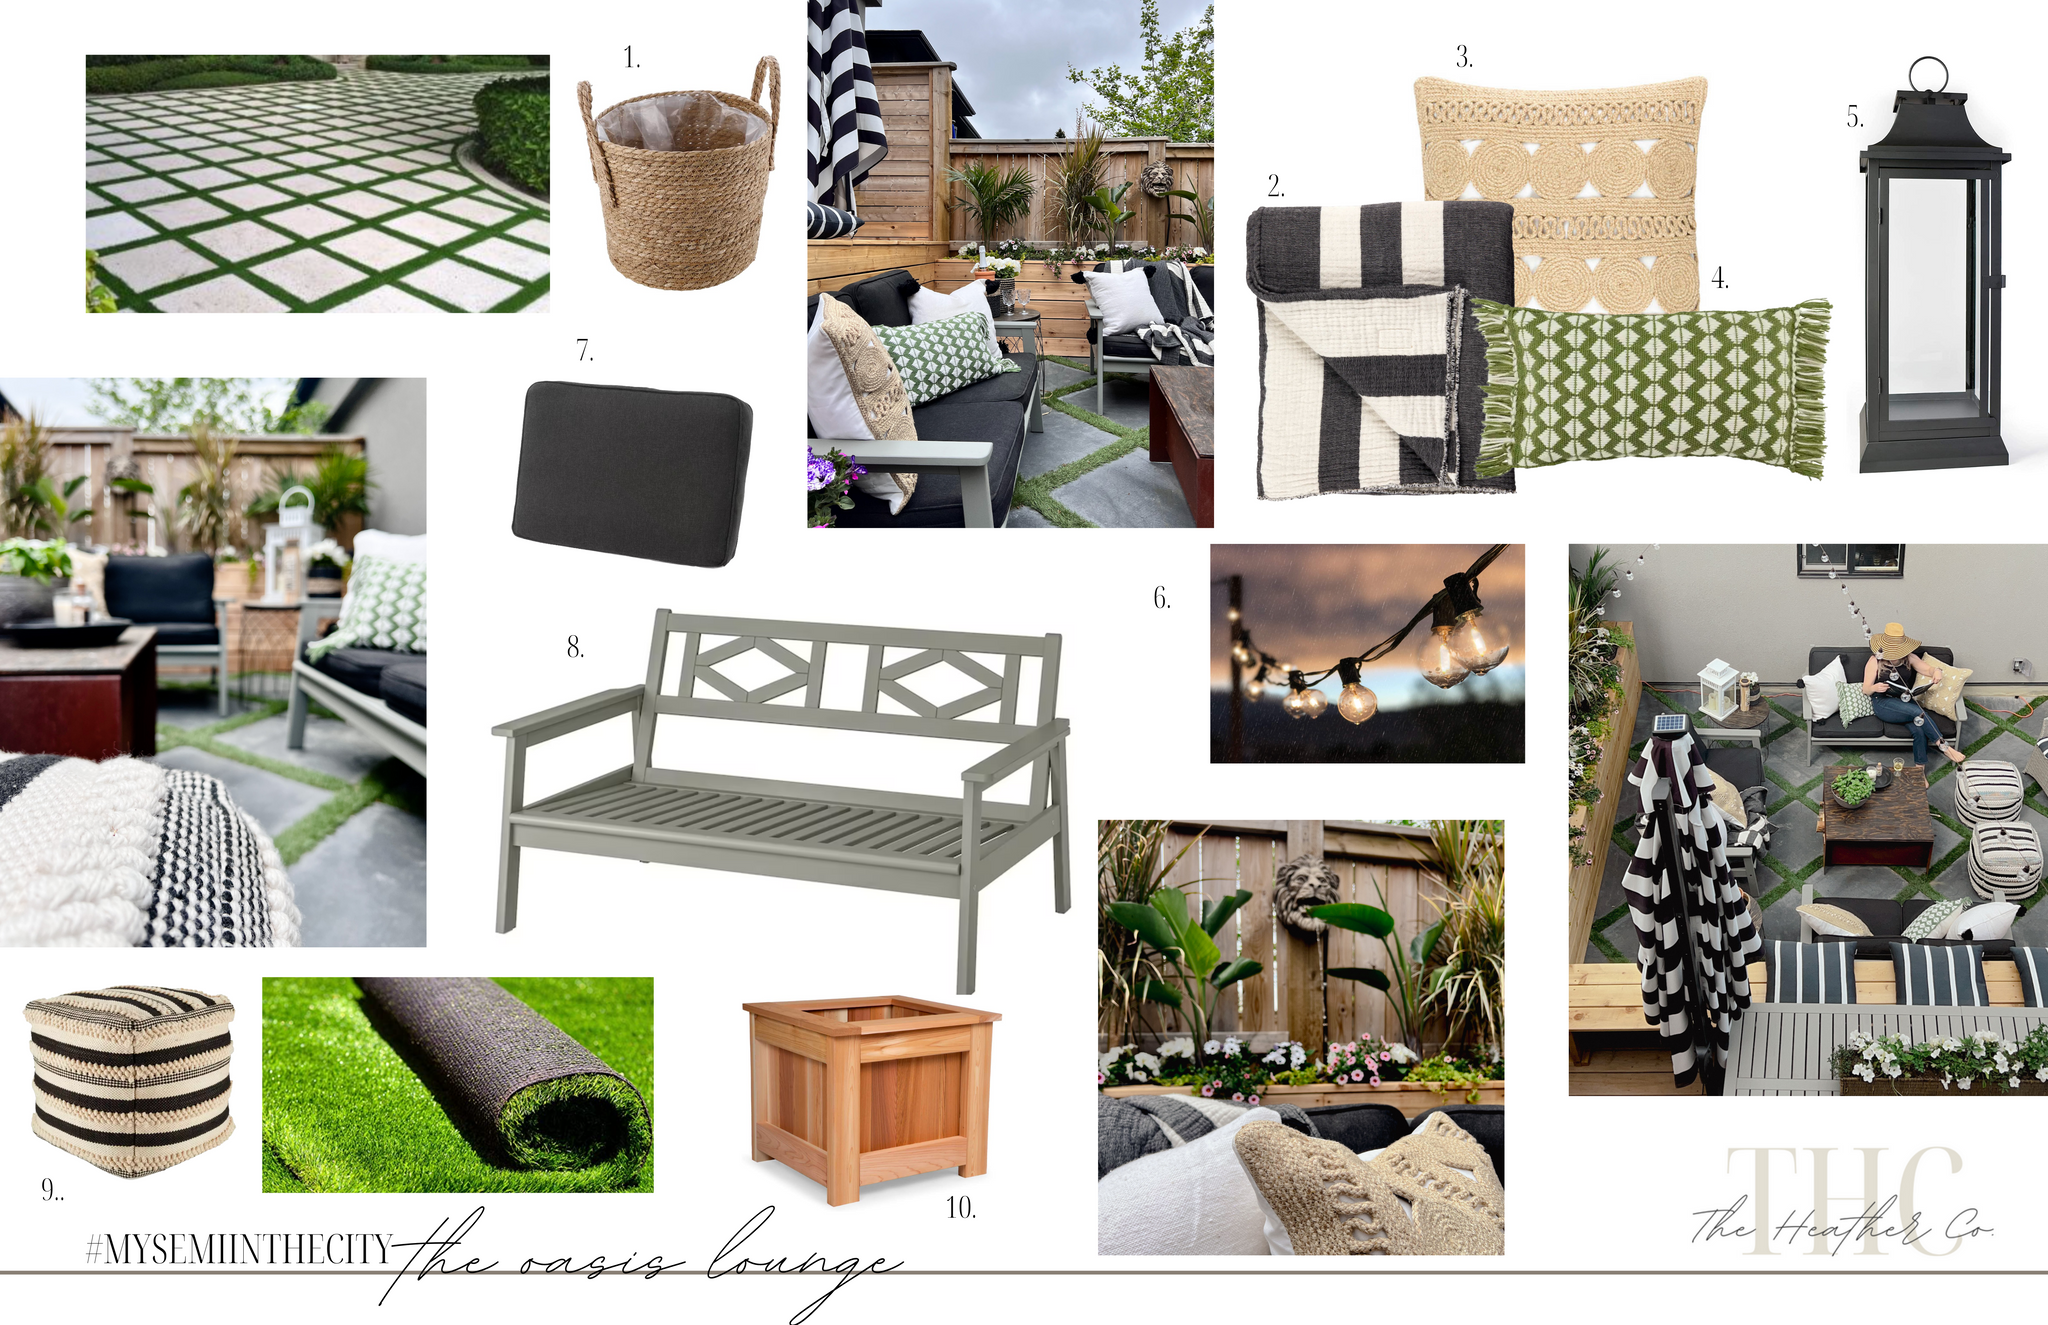 Design Inspiration for Outdoor Decor of Outdoor Livingroom with diamond pavers and artificial grass like Chris loves Julia